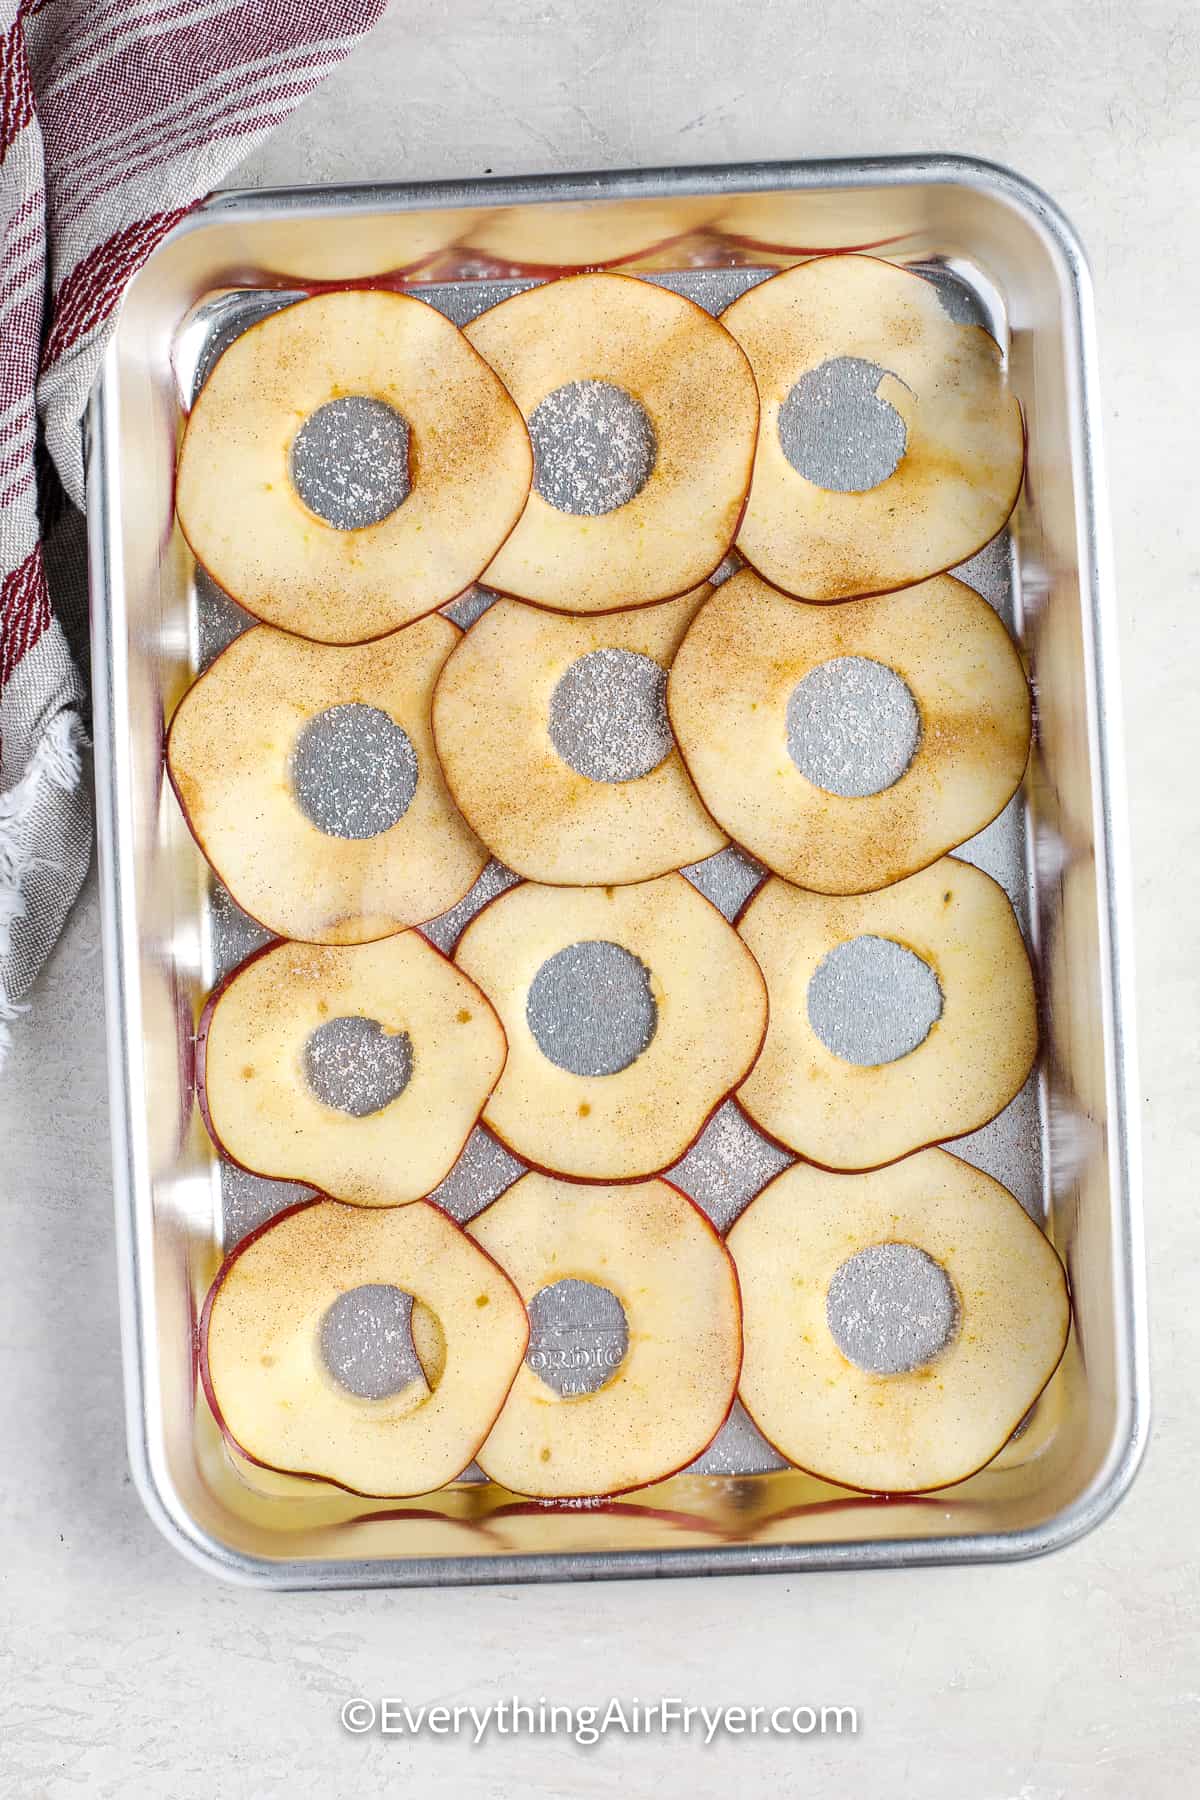 sliced apples on a baking tray